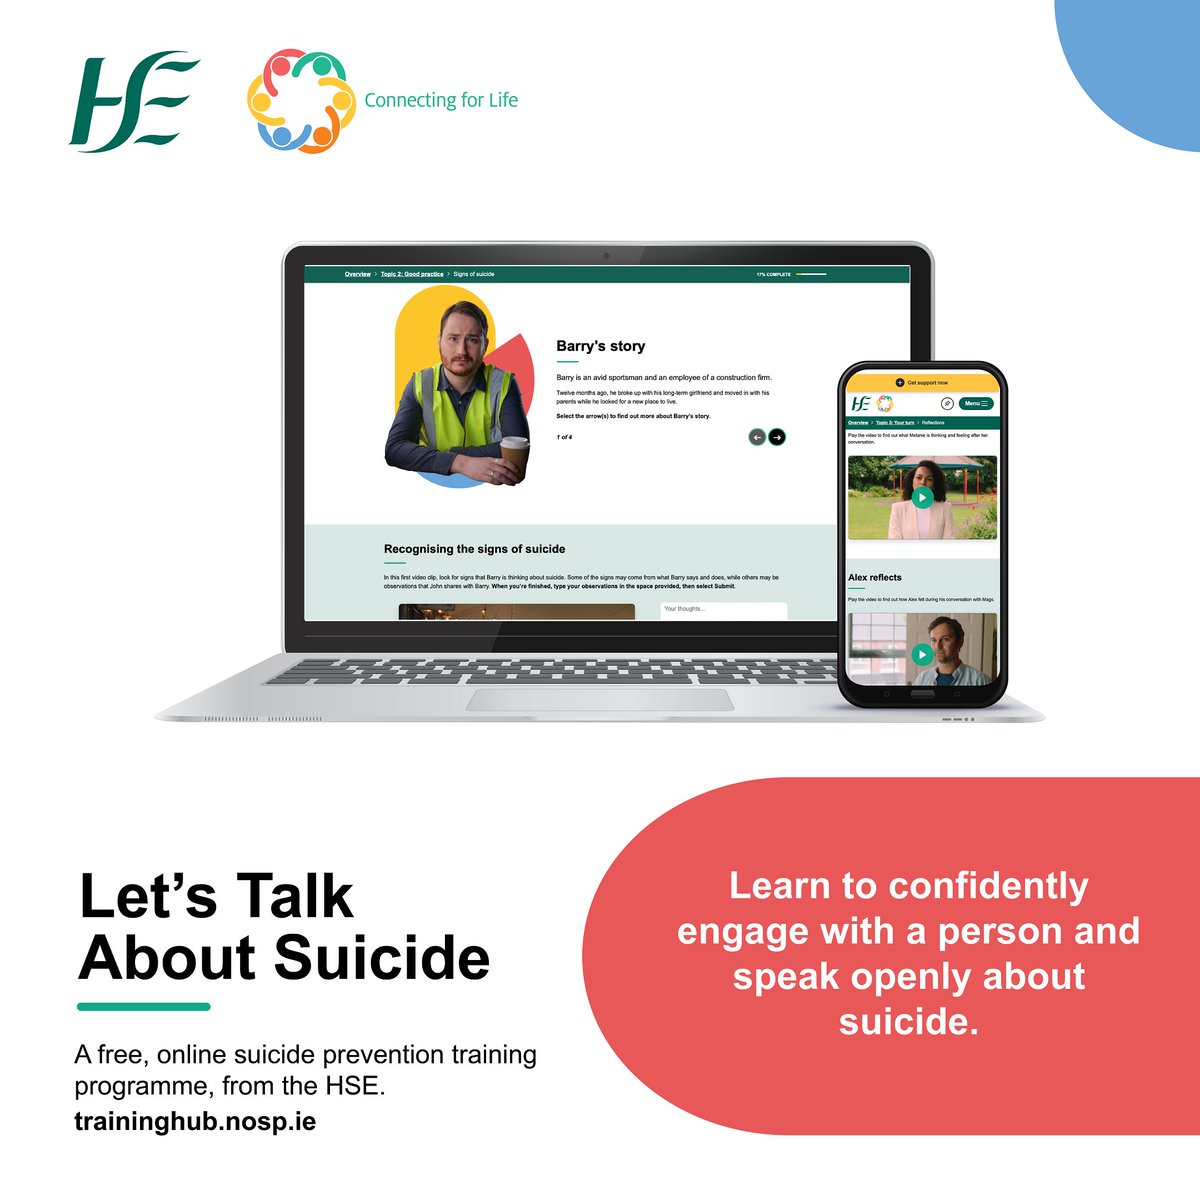 #LetsTalkAboutSuicide is a new introductory online programme to help people identify others who might be at risk of suicide, confidently ask about the topic and connect them with resources that can help them stay safe: bit.ly/4bLLu7h #ConnectingforLife @NOSPIreland